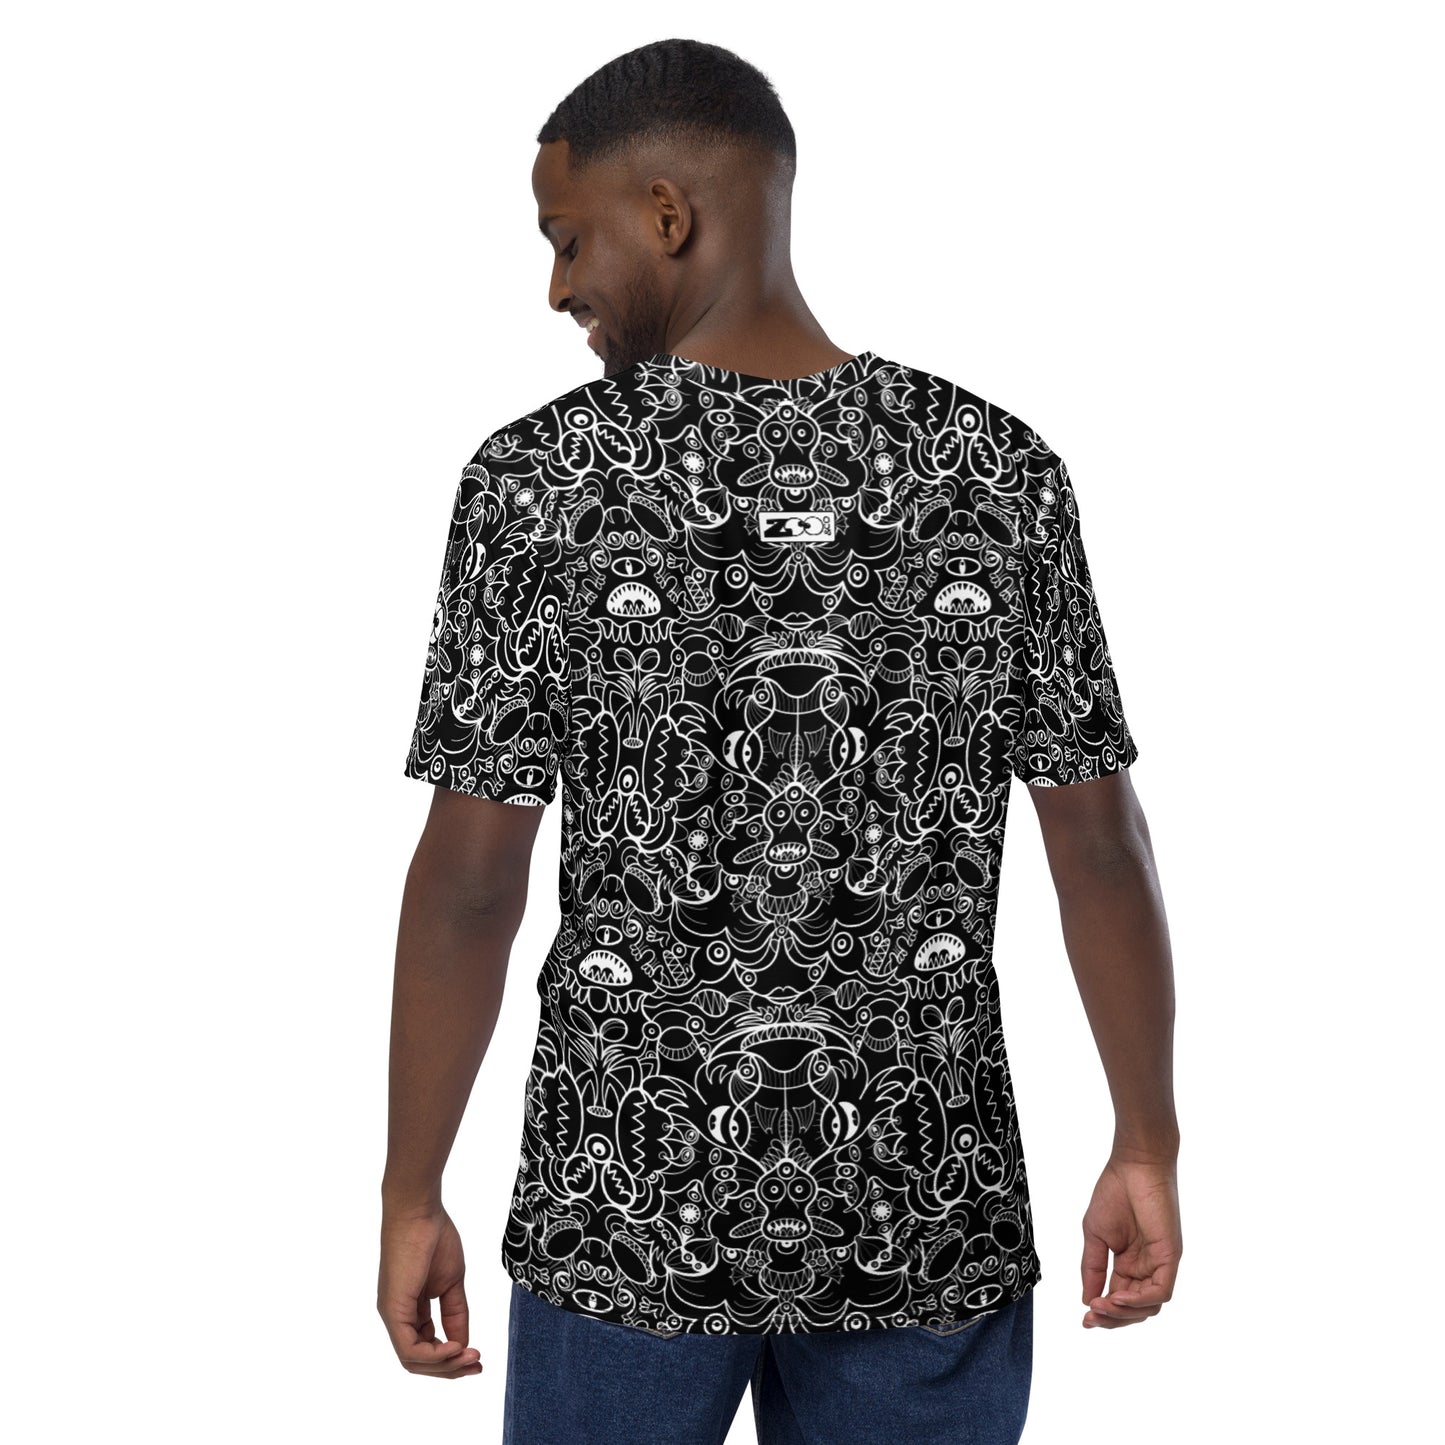 The powerful dark side of the Doodle world Men's All over print t-shirt. Back view